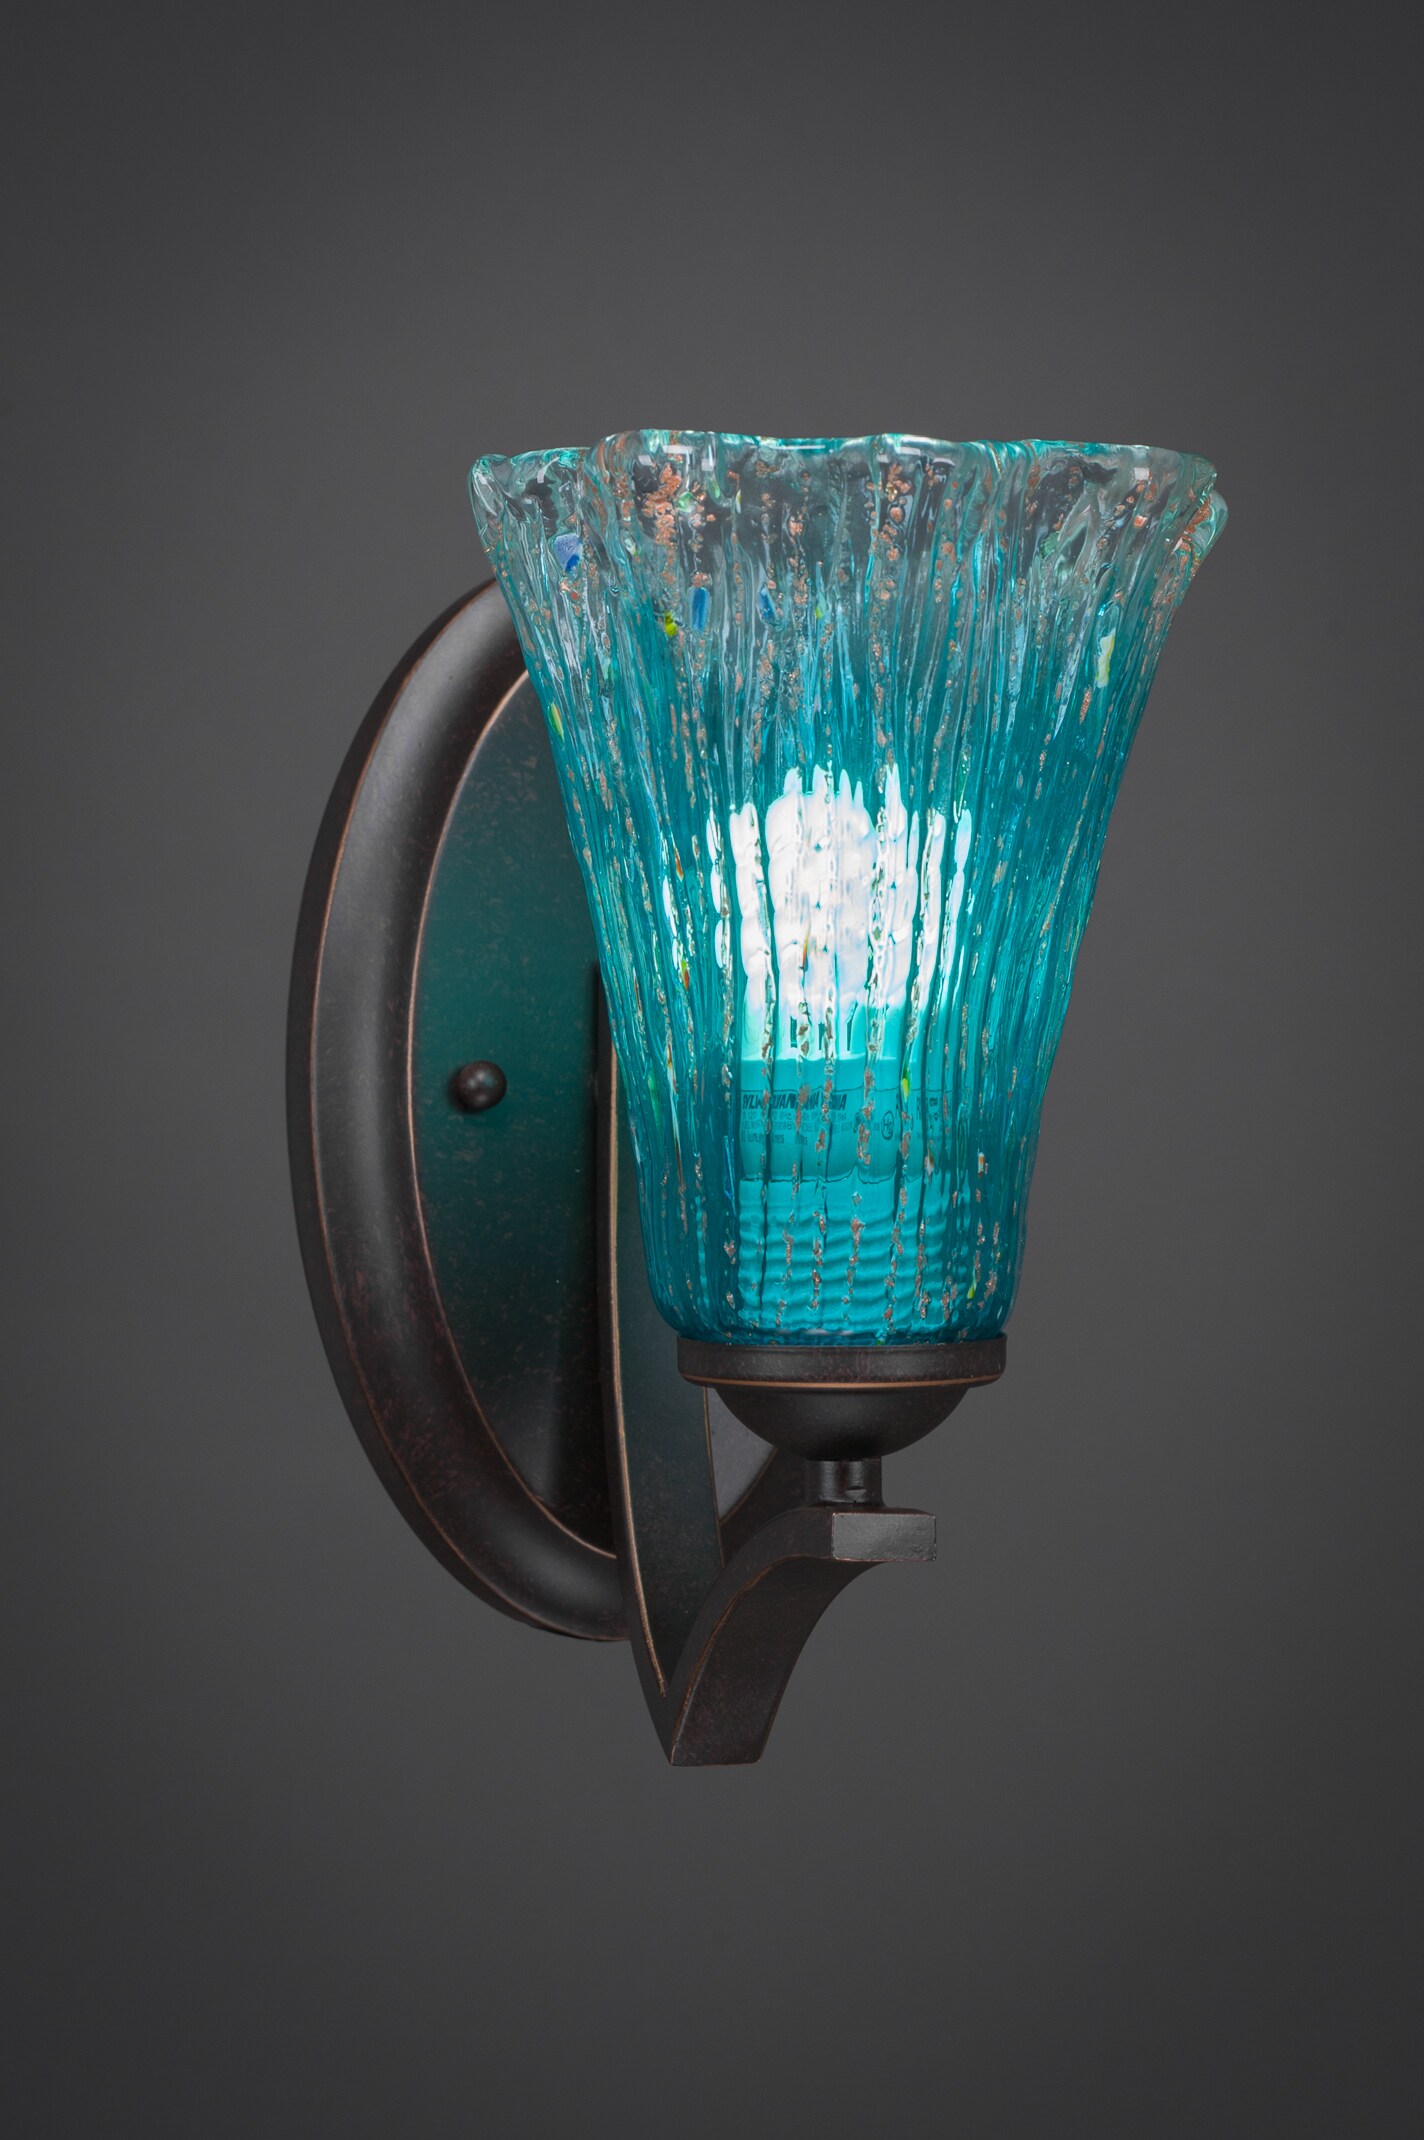 Zilo Wall Sconce Shown In Dark Granite Finish With 5.5 Teal Crystal Glass